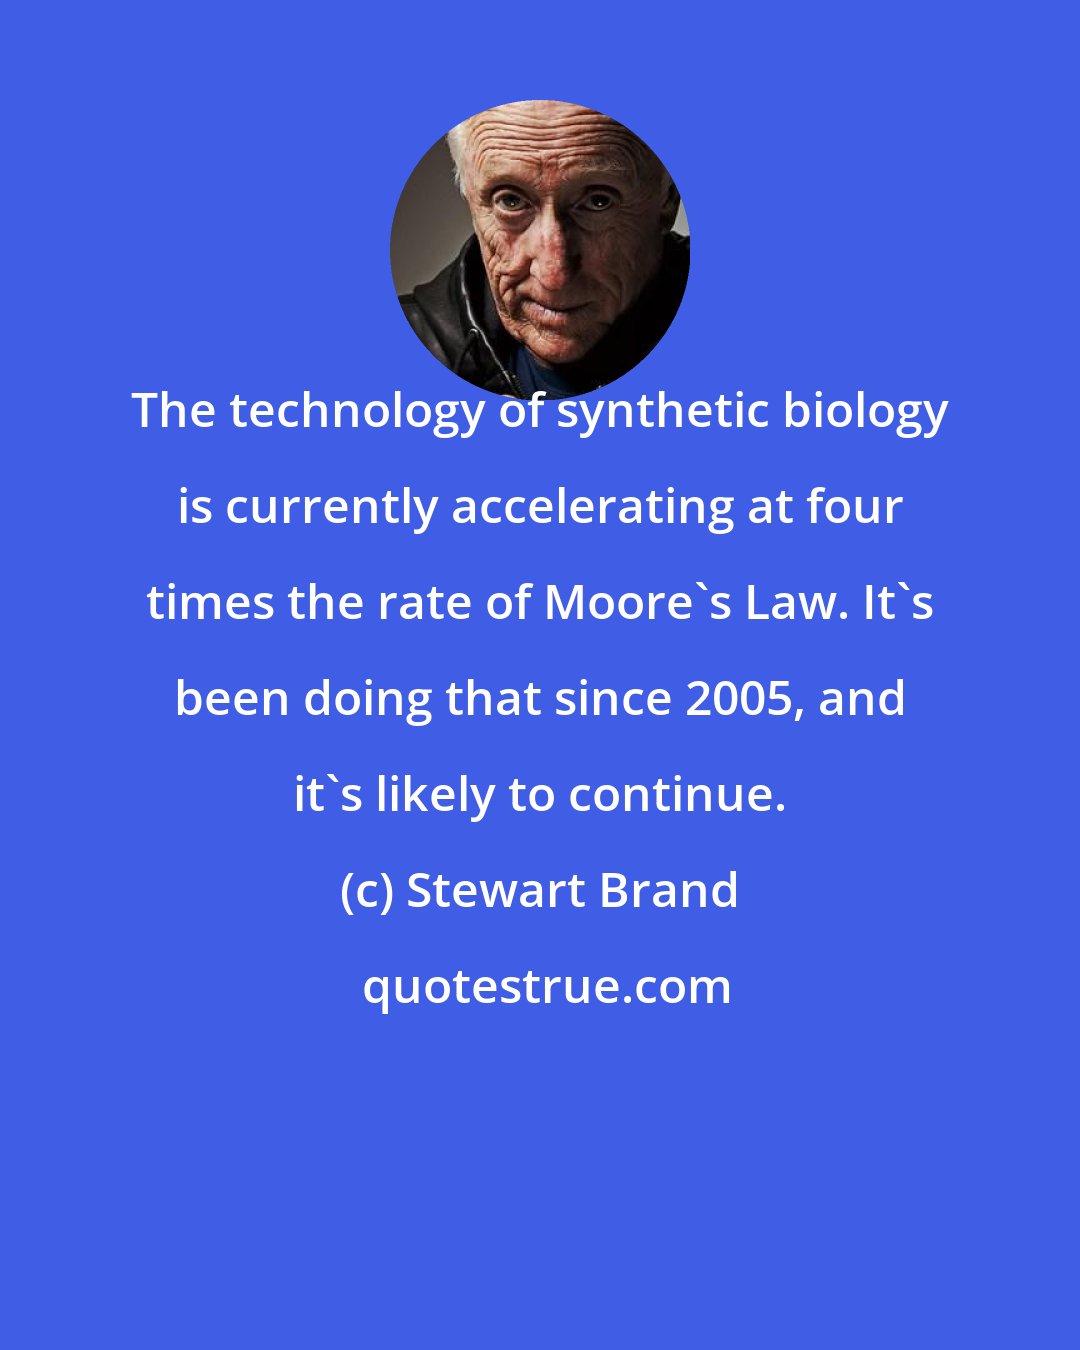 Stewart Brand: The technology of synthetic biology is currently accelerating at four times the rate of Moore's Law. It's been doing that since 2005, and it's likely to continue.